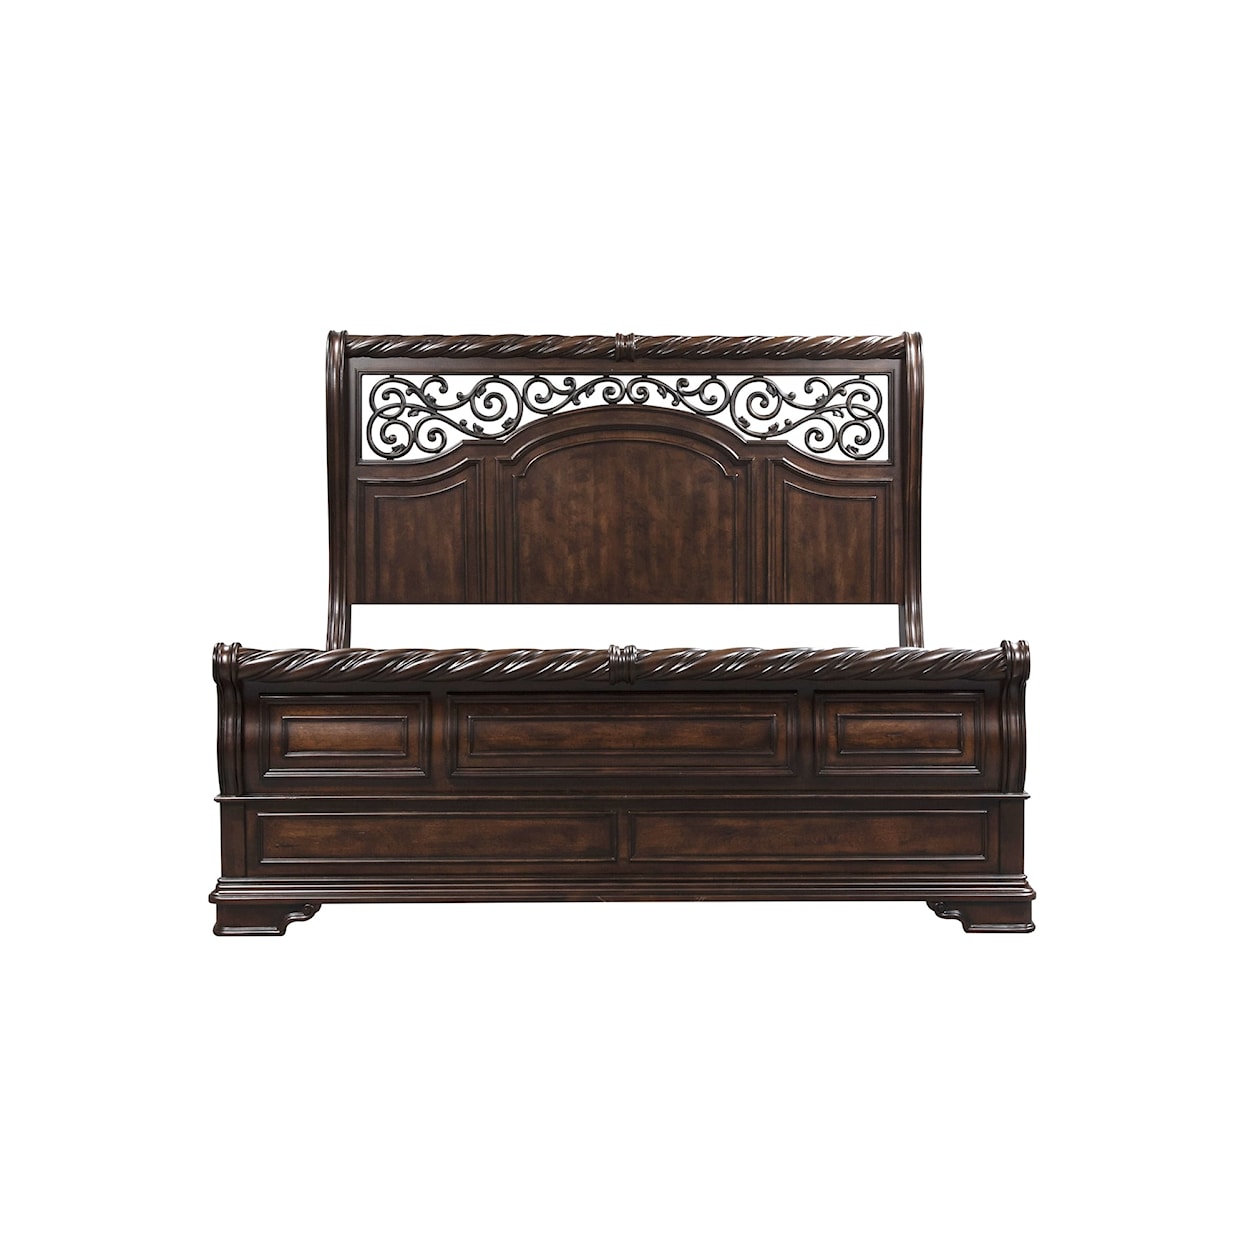 Libby Arbor Place Queen Sleigh Bed